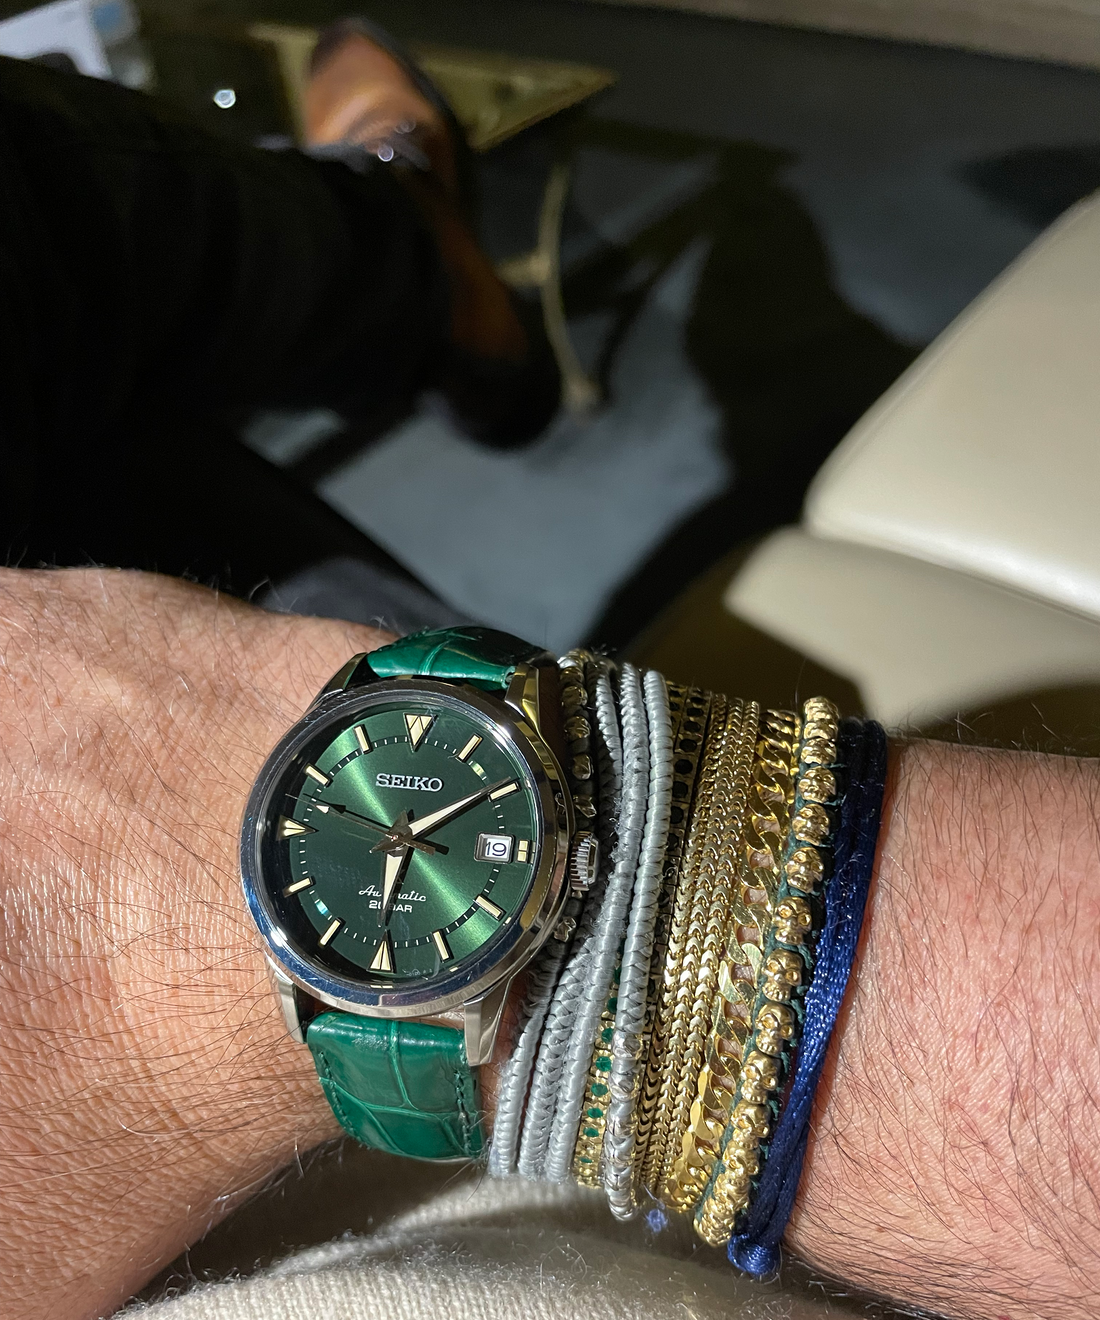 The Seiko Alpinist Review - I Took It Into A Proper Blizzard And It Was Fantastic